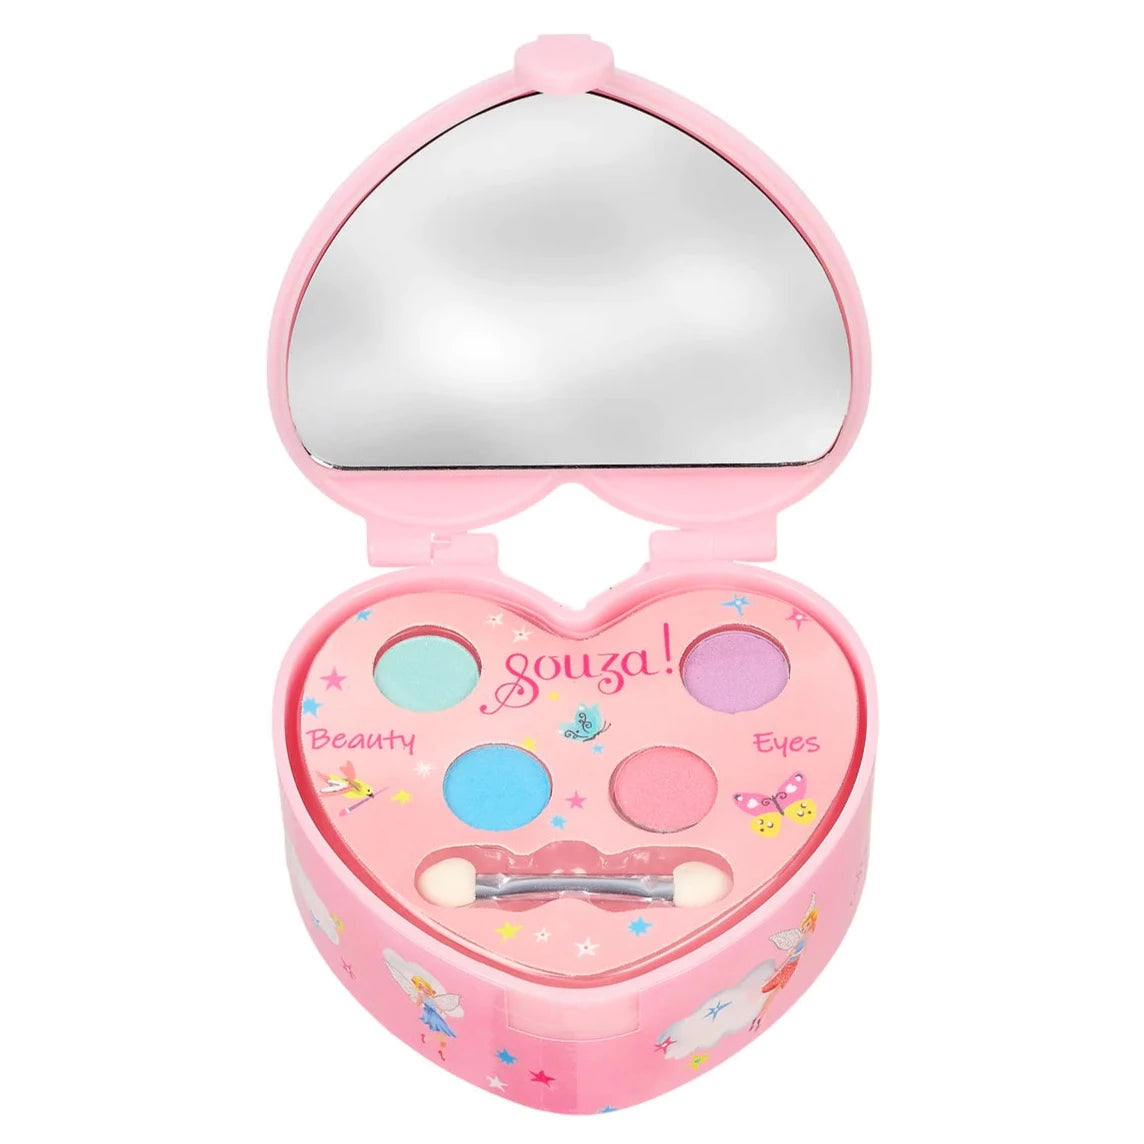 Souza!: Jewelry casket with a mirror and eye shadows heart